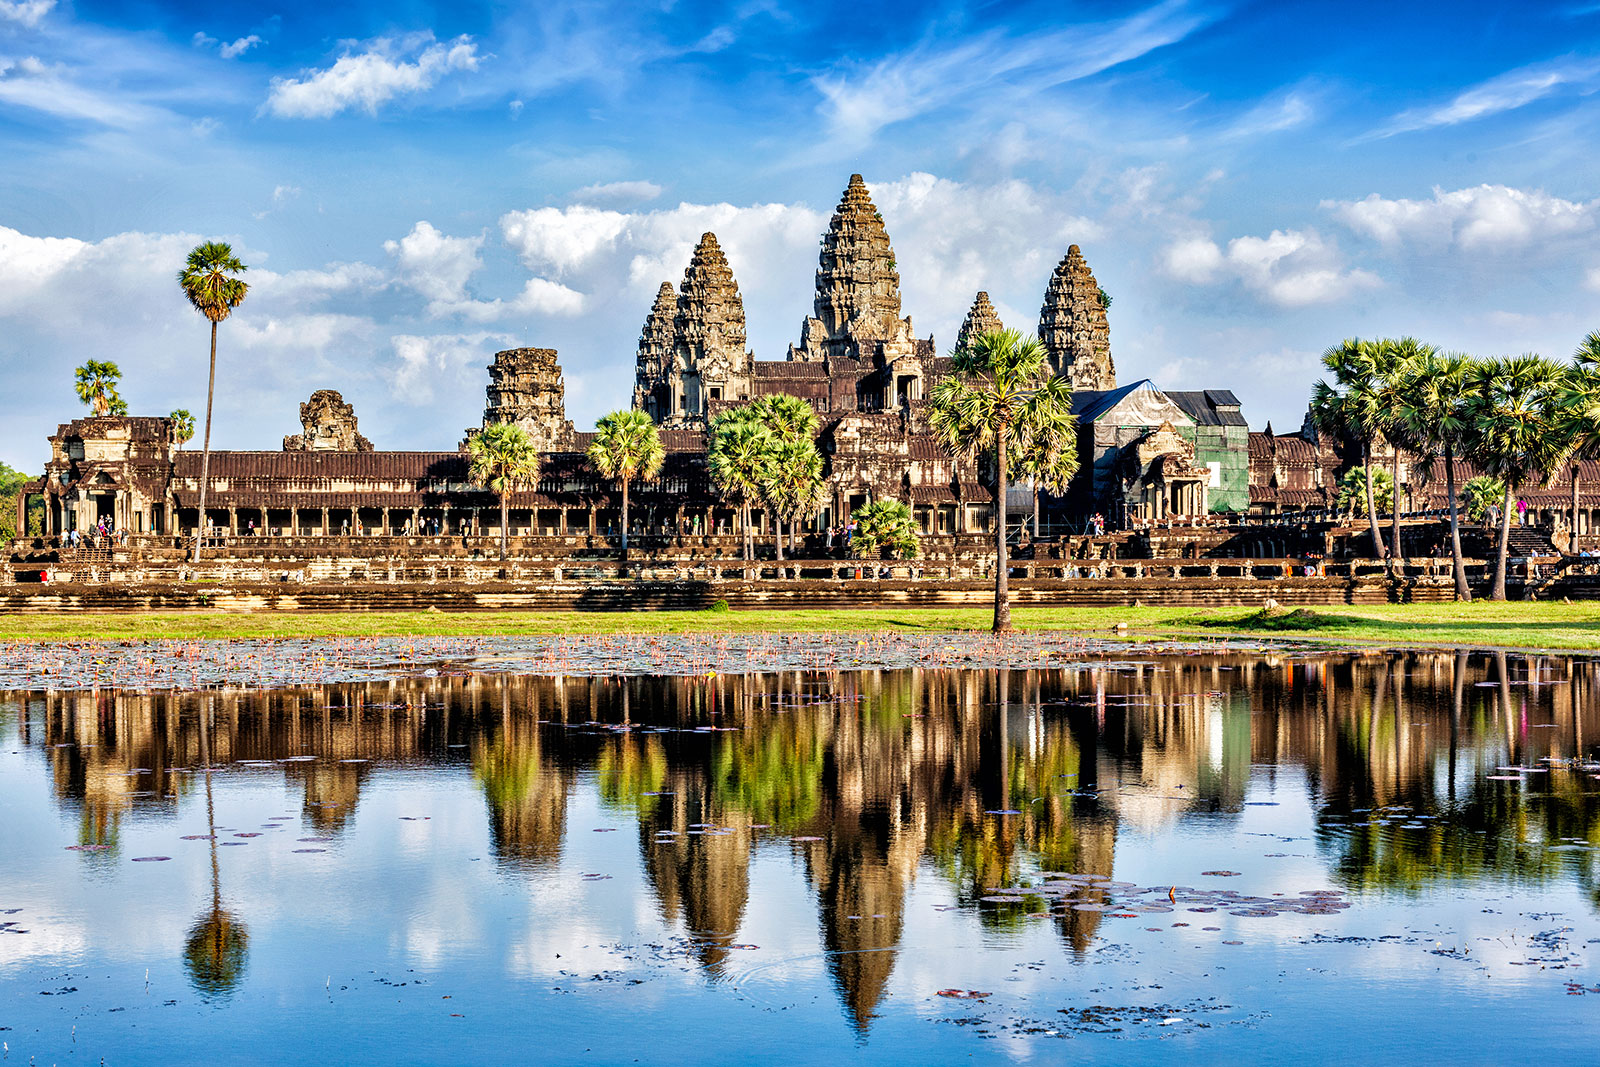 I’m Sorry, But You’ll Be Able to Pass This Trivia Test Only If You’re the Smart Friend Angkor Wat, Siem Reap, Cambodia